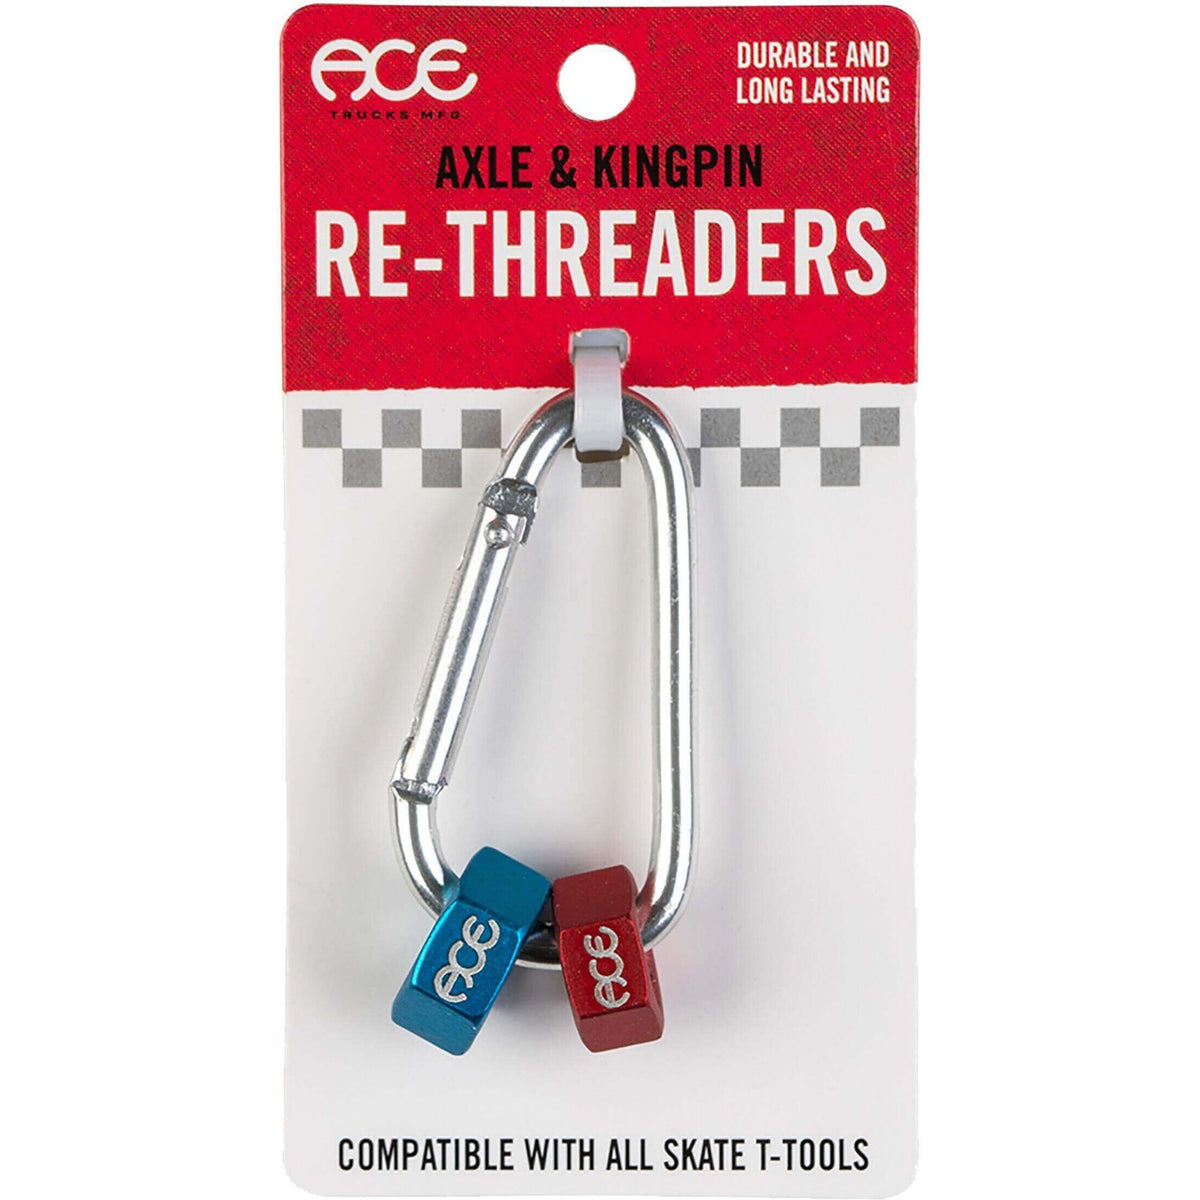 Ace Axle and Kingpin Re-Threaders